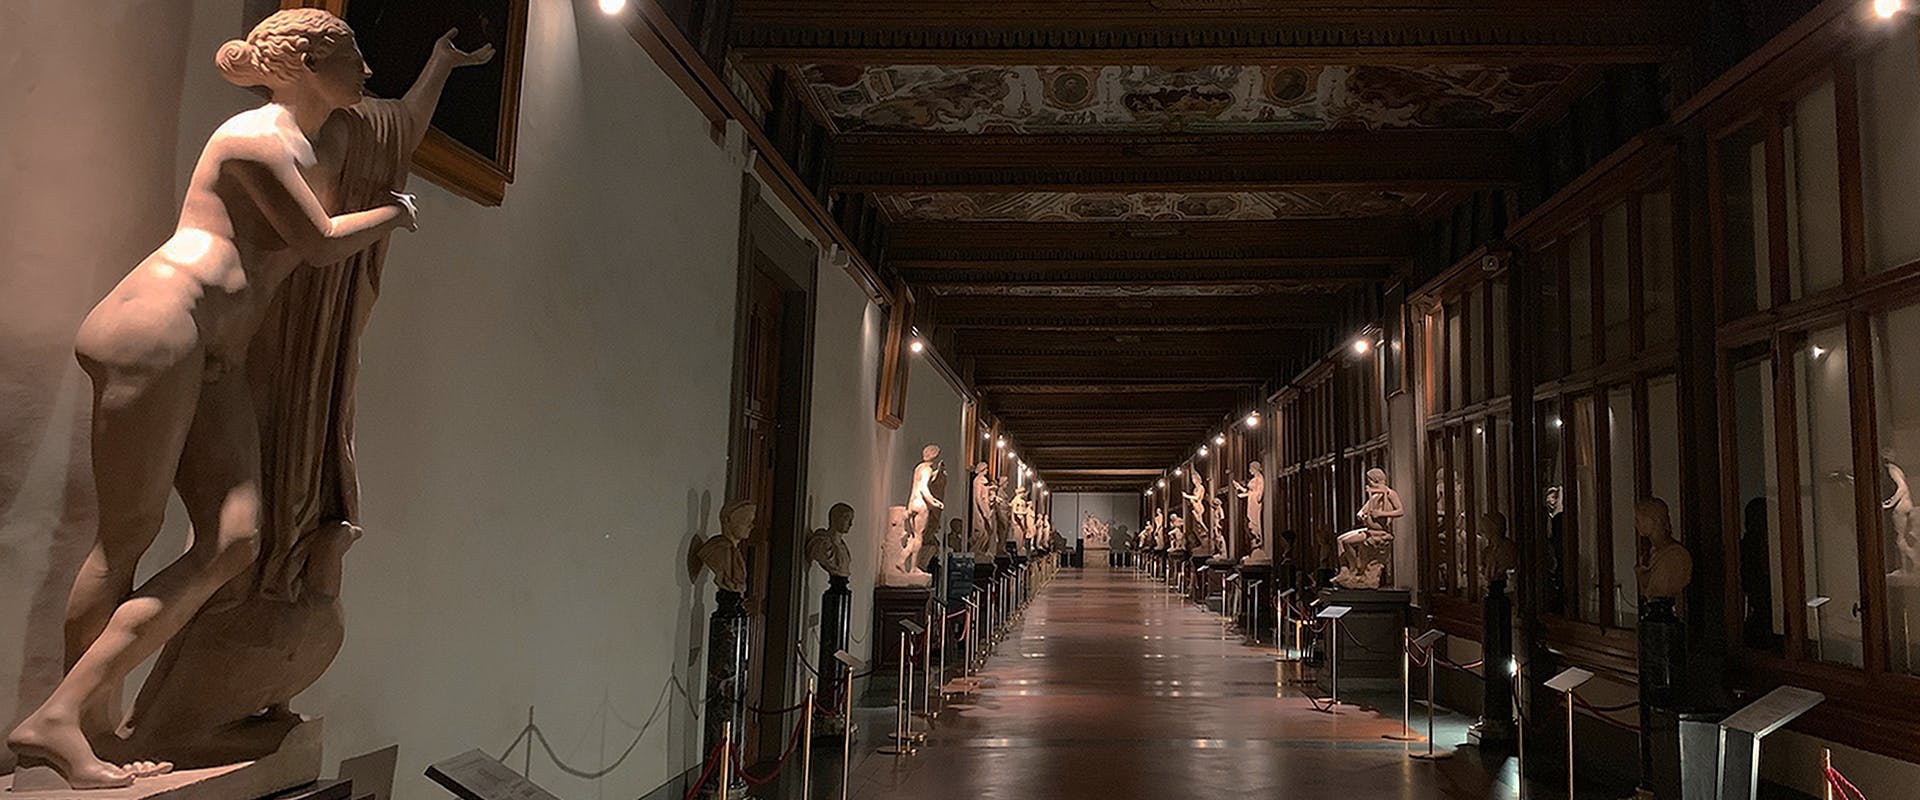 Night at the Museum 2019: nocturnal opening of the second floor of the Uffizi at €1!